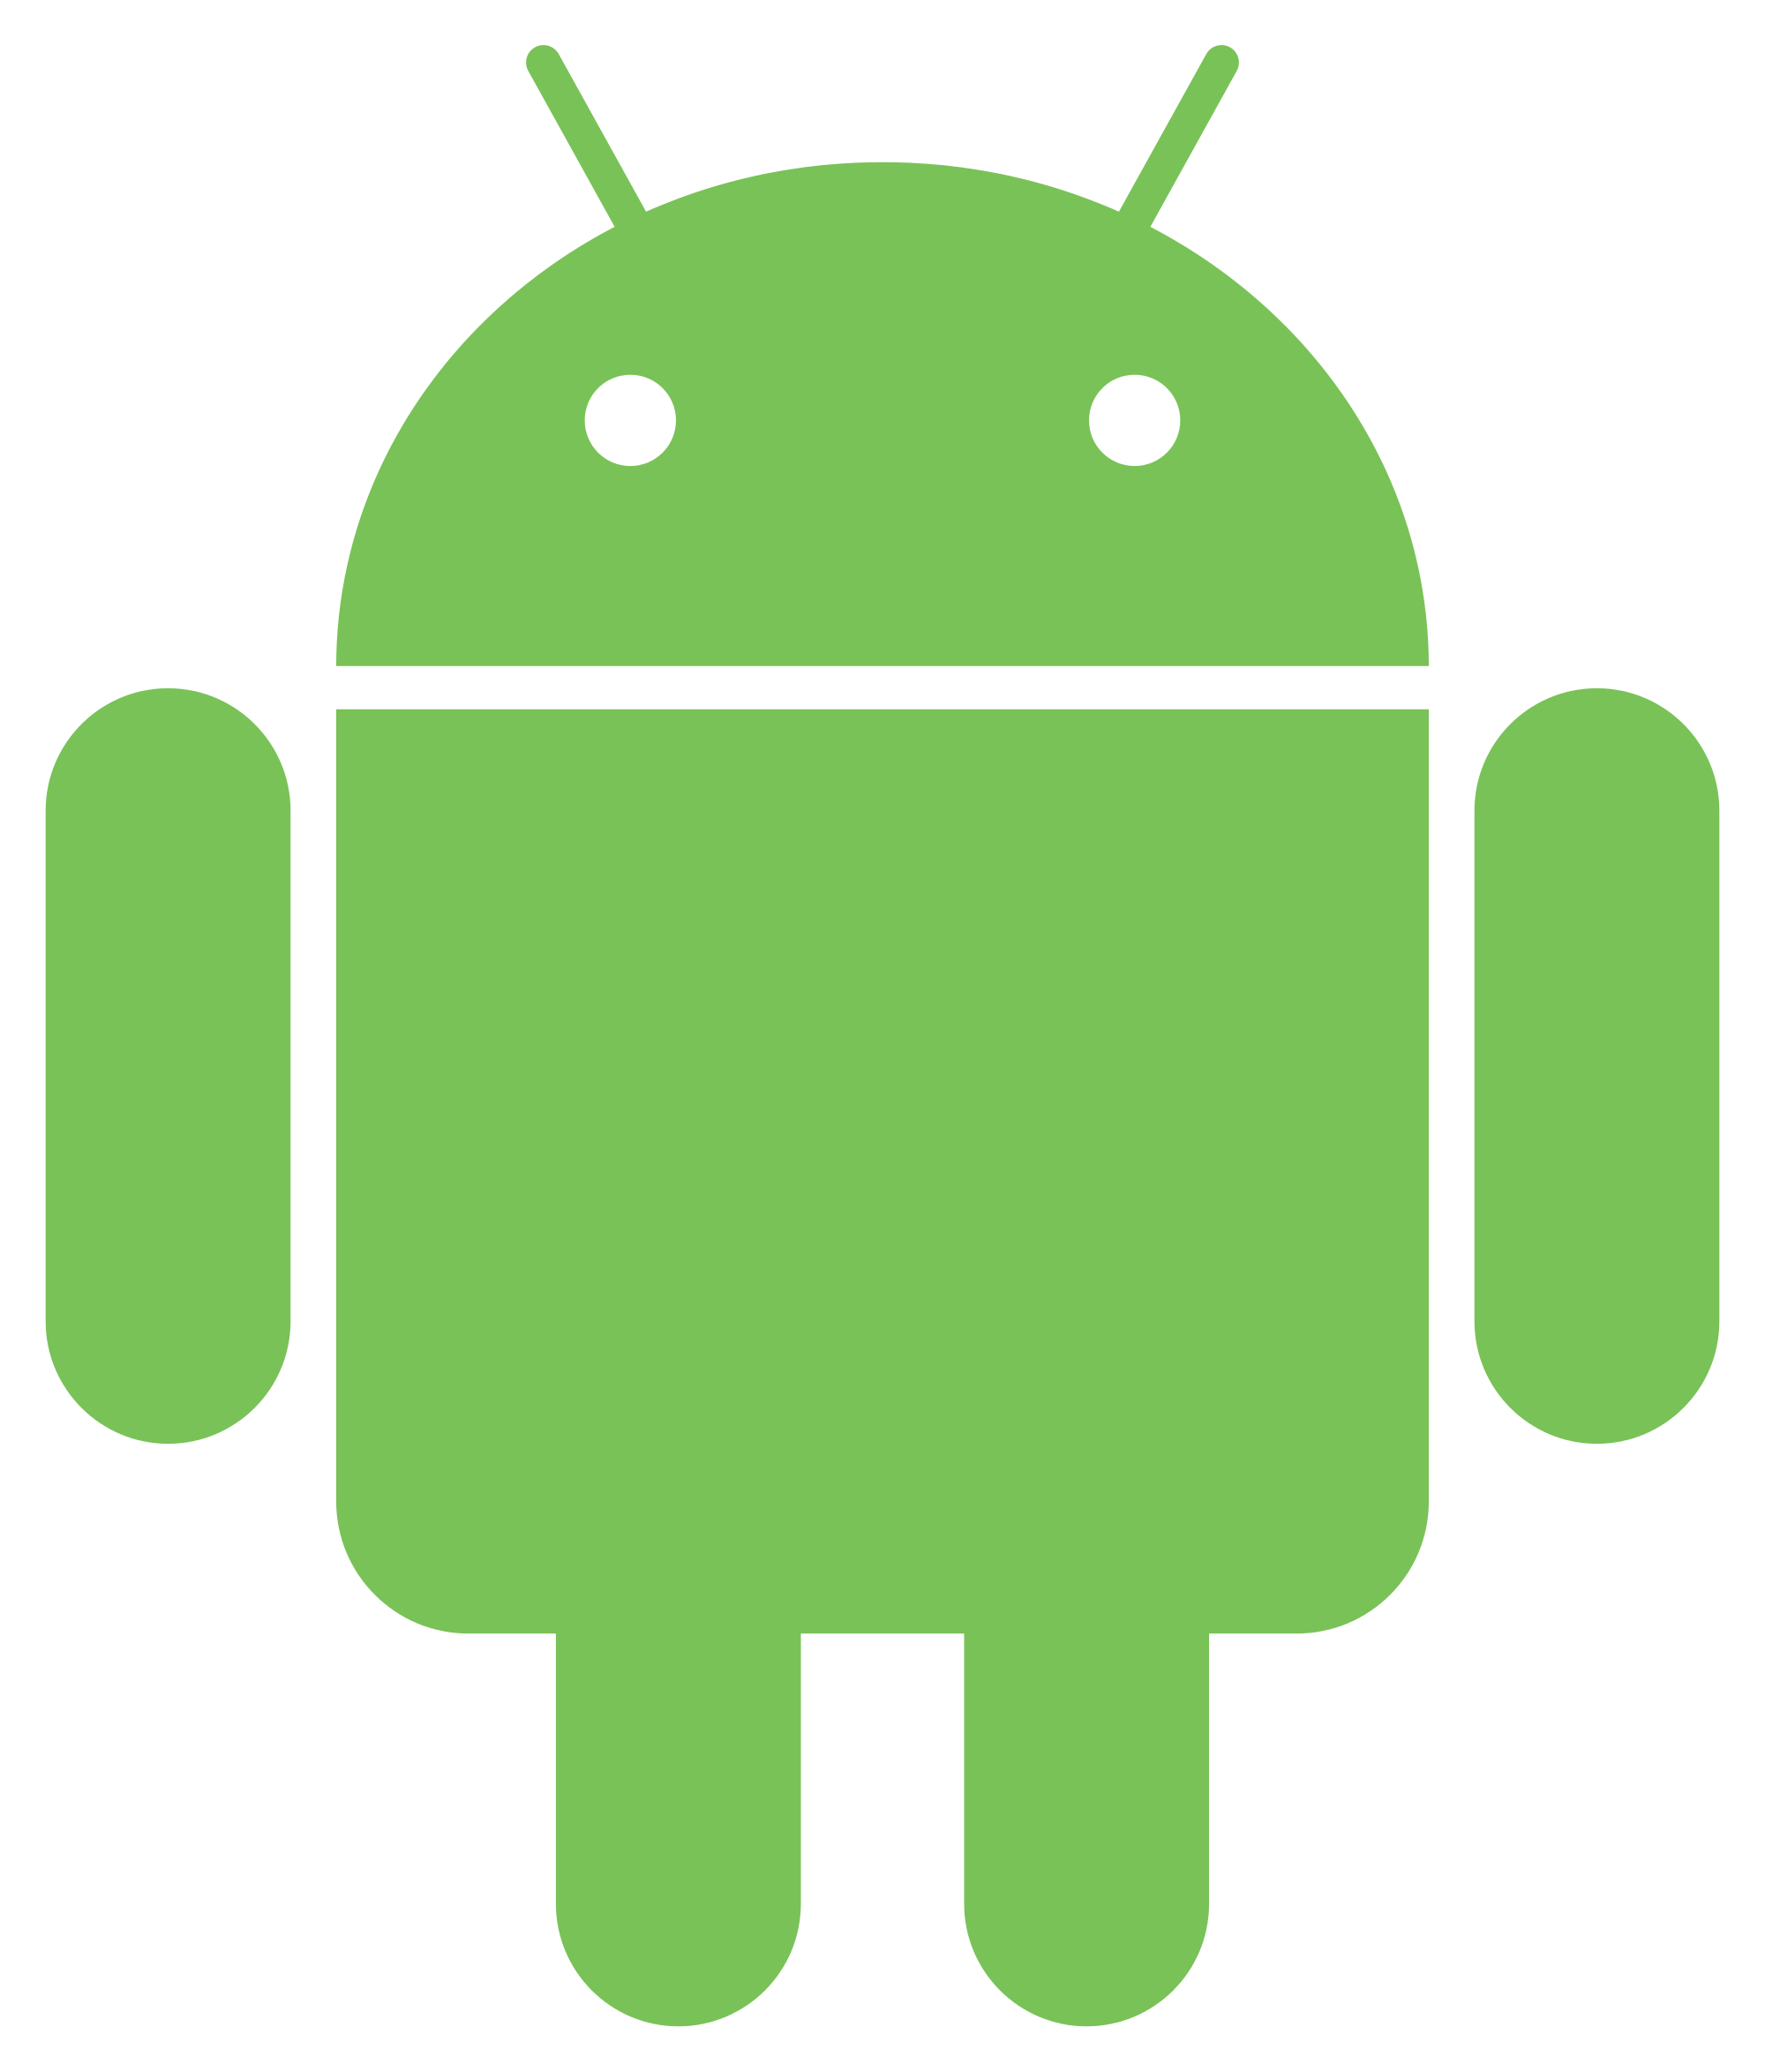 Android app developers